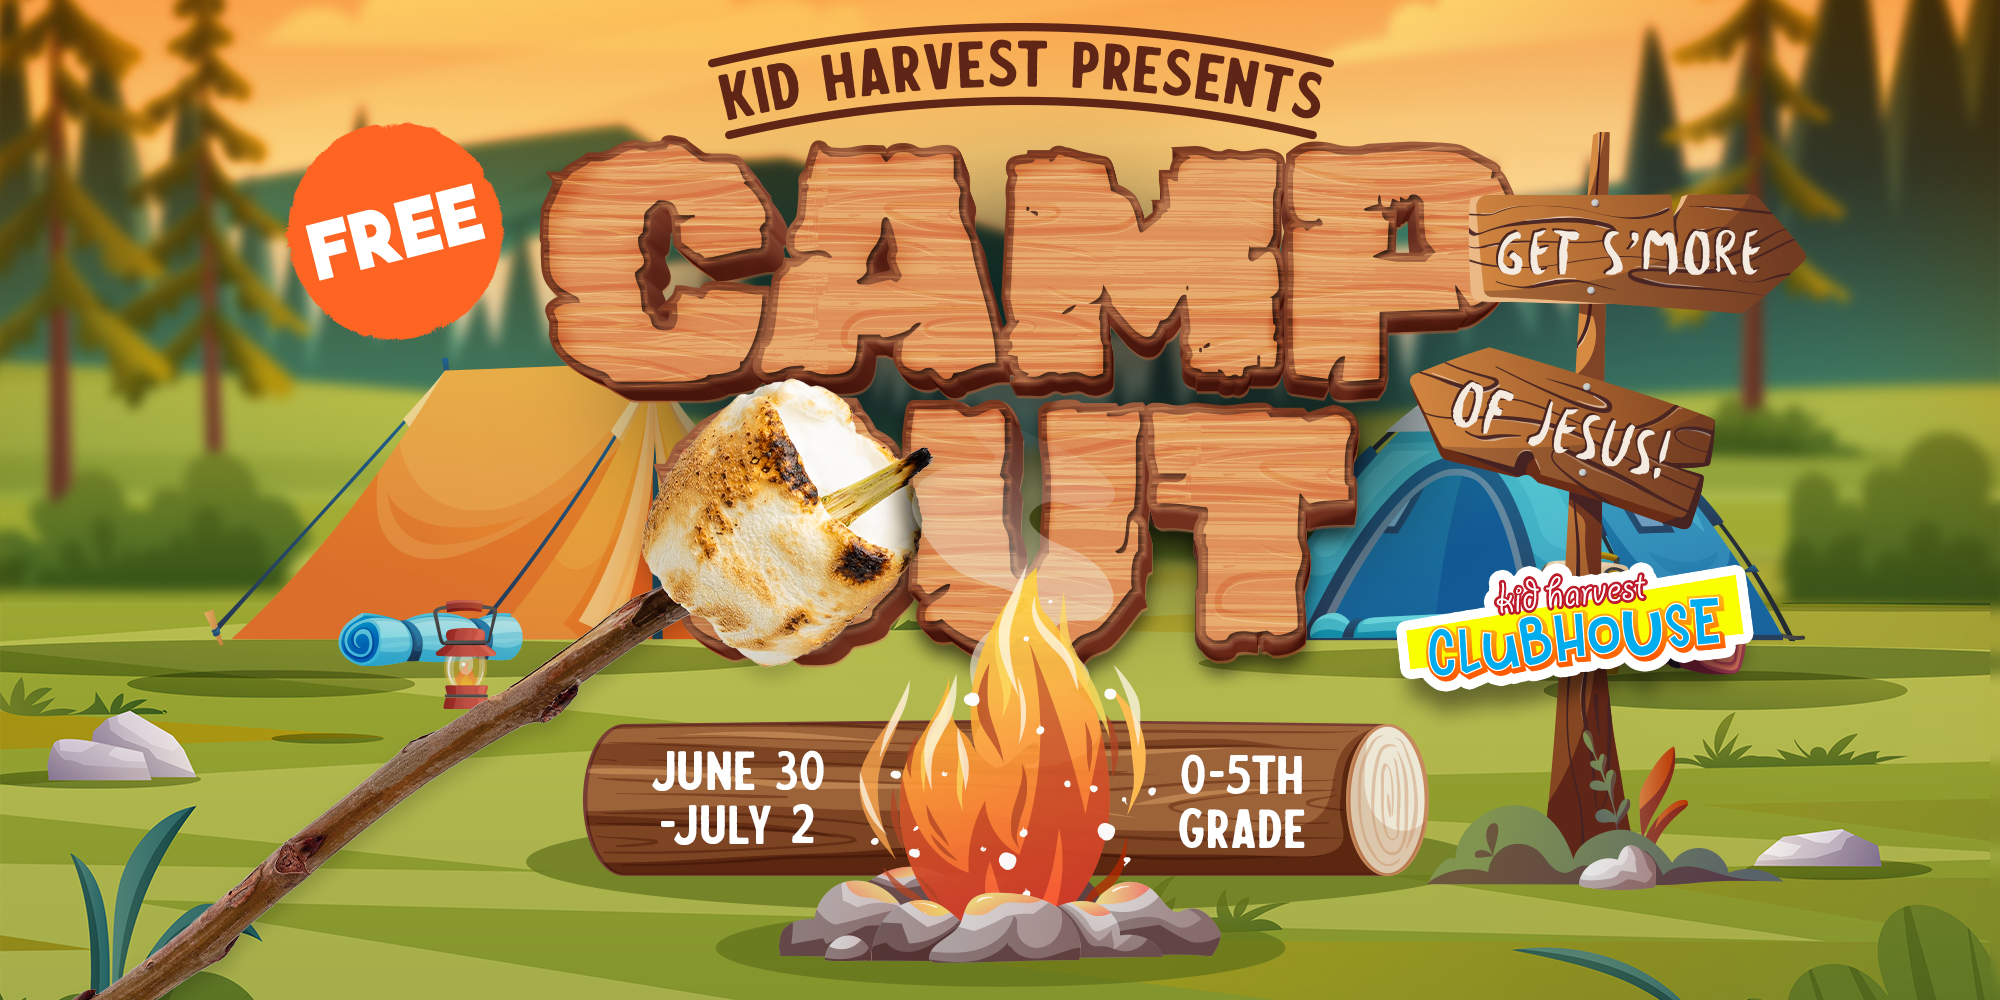 Kid Harvest Presents Camp Out Get S'More of Jesus! Kid Harvest Clubhouse June 30 - July 2 0-5th Grade